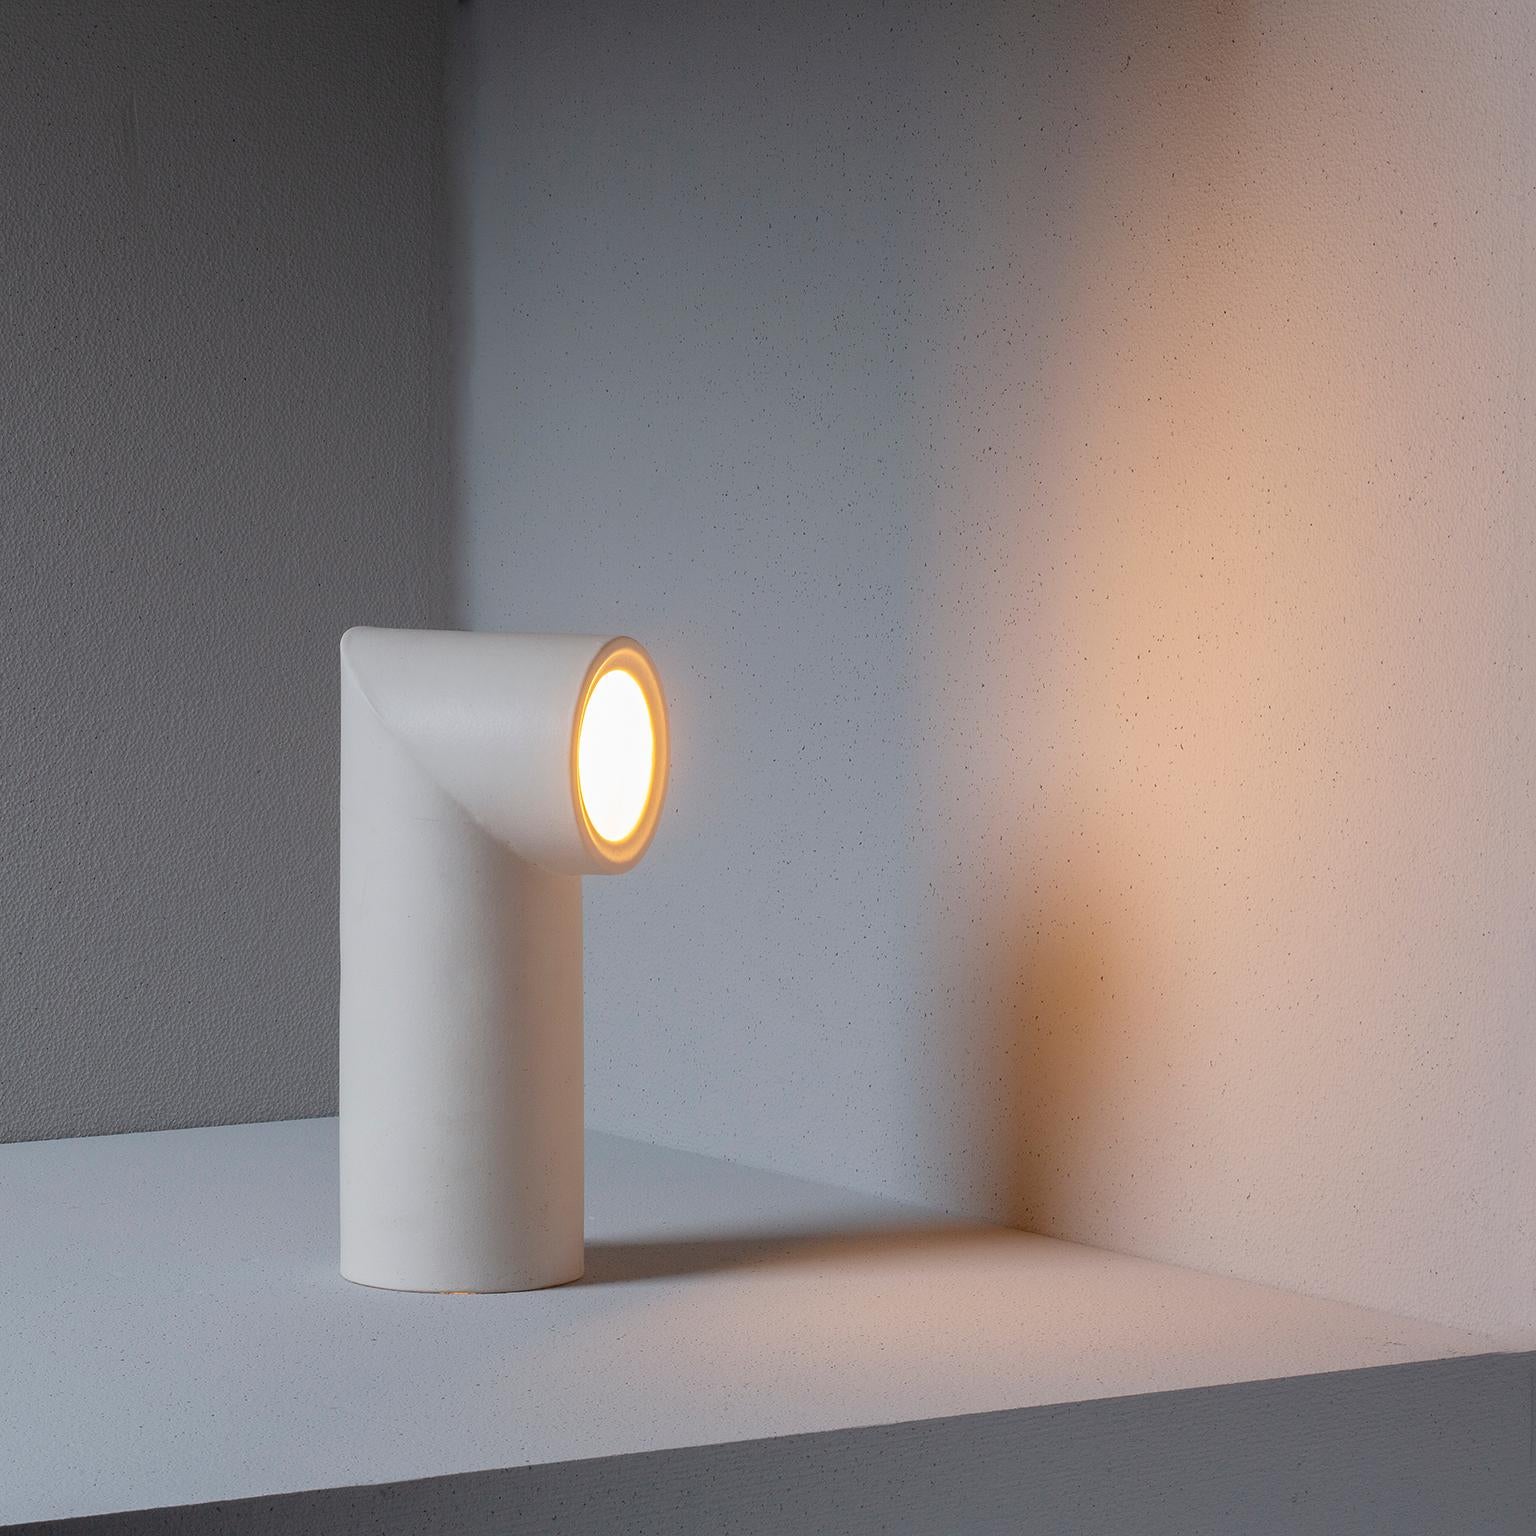 Tubes
Ceramic table lamp, a stereotypical element inspired by minimalism and Industrial archaeology. The base is turned on a potter’s wheel, cut at an angle of 45° and rebuilt in the opposite direction. It requires a simple 7v. LED light. This lamp